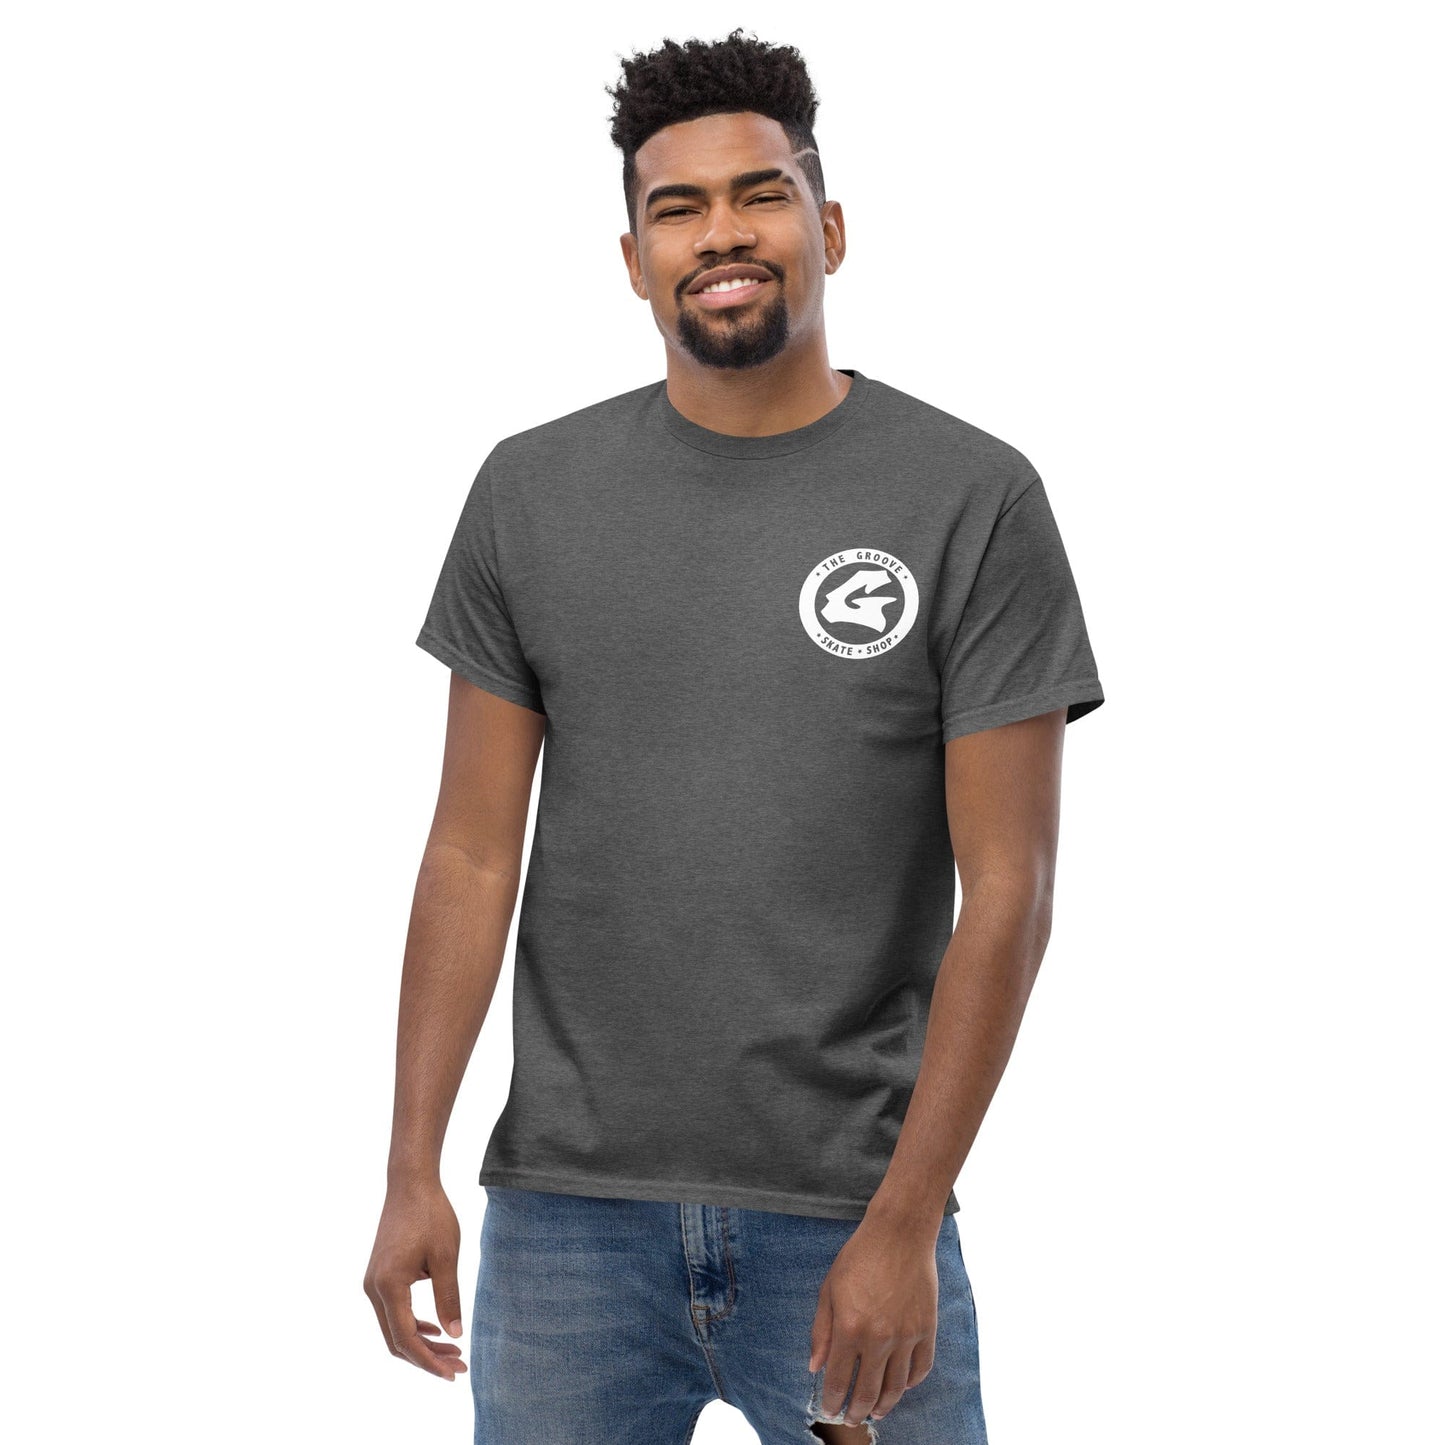 Shirts Groove OG- Men's classic tee The Groove Skate Shop The Groove Skate Shop